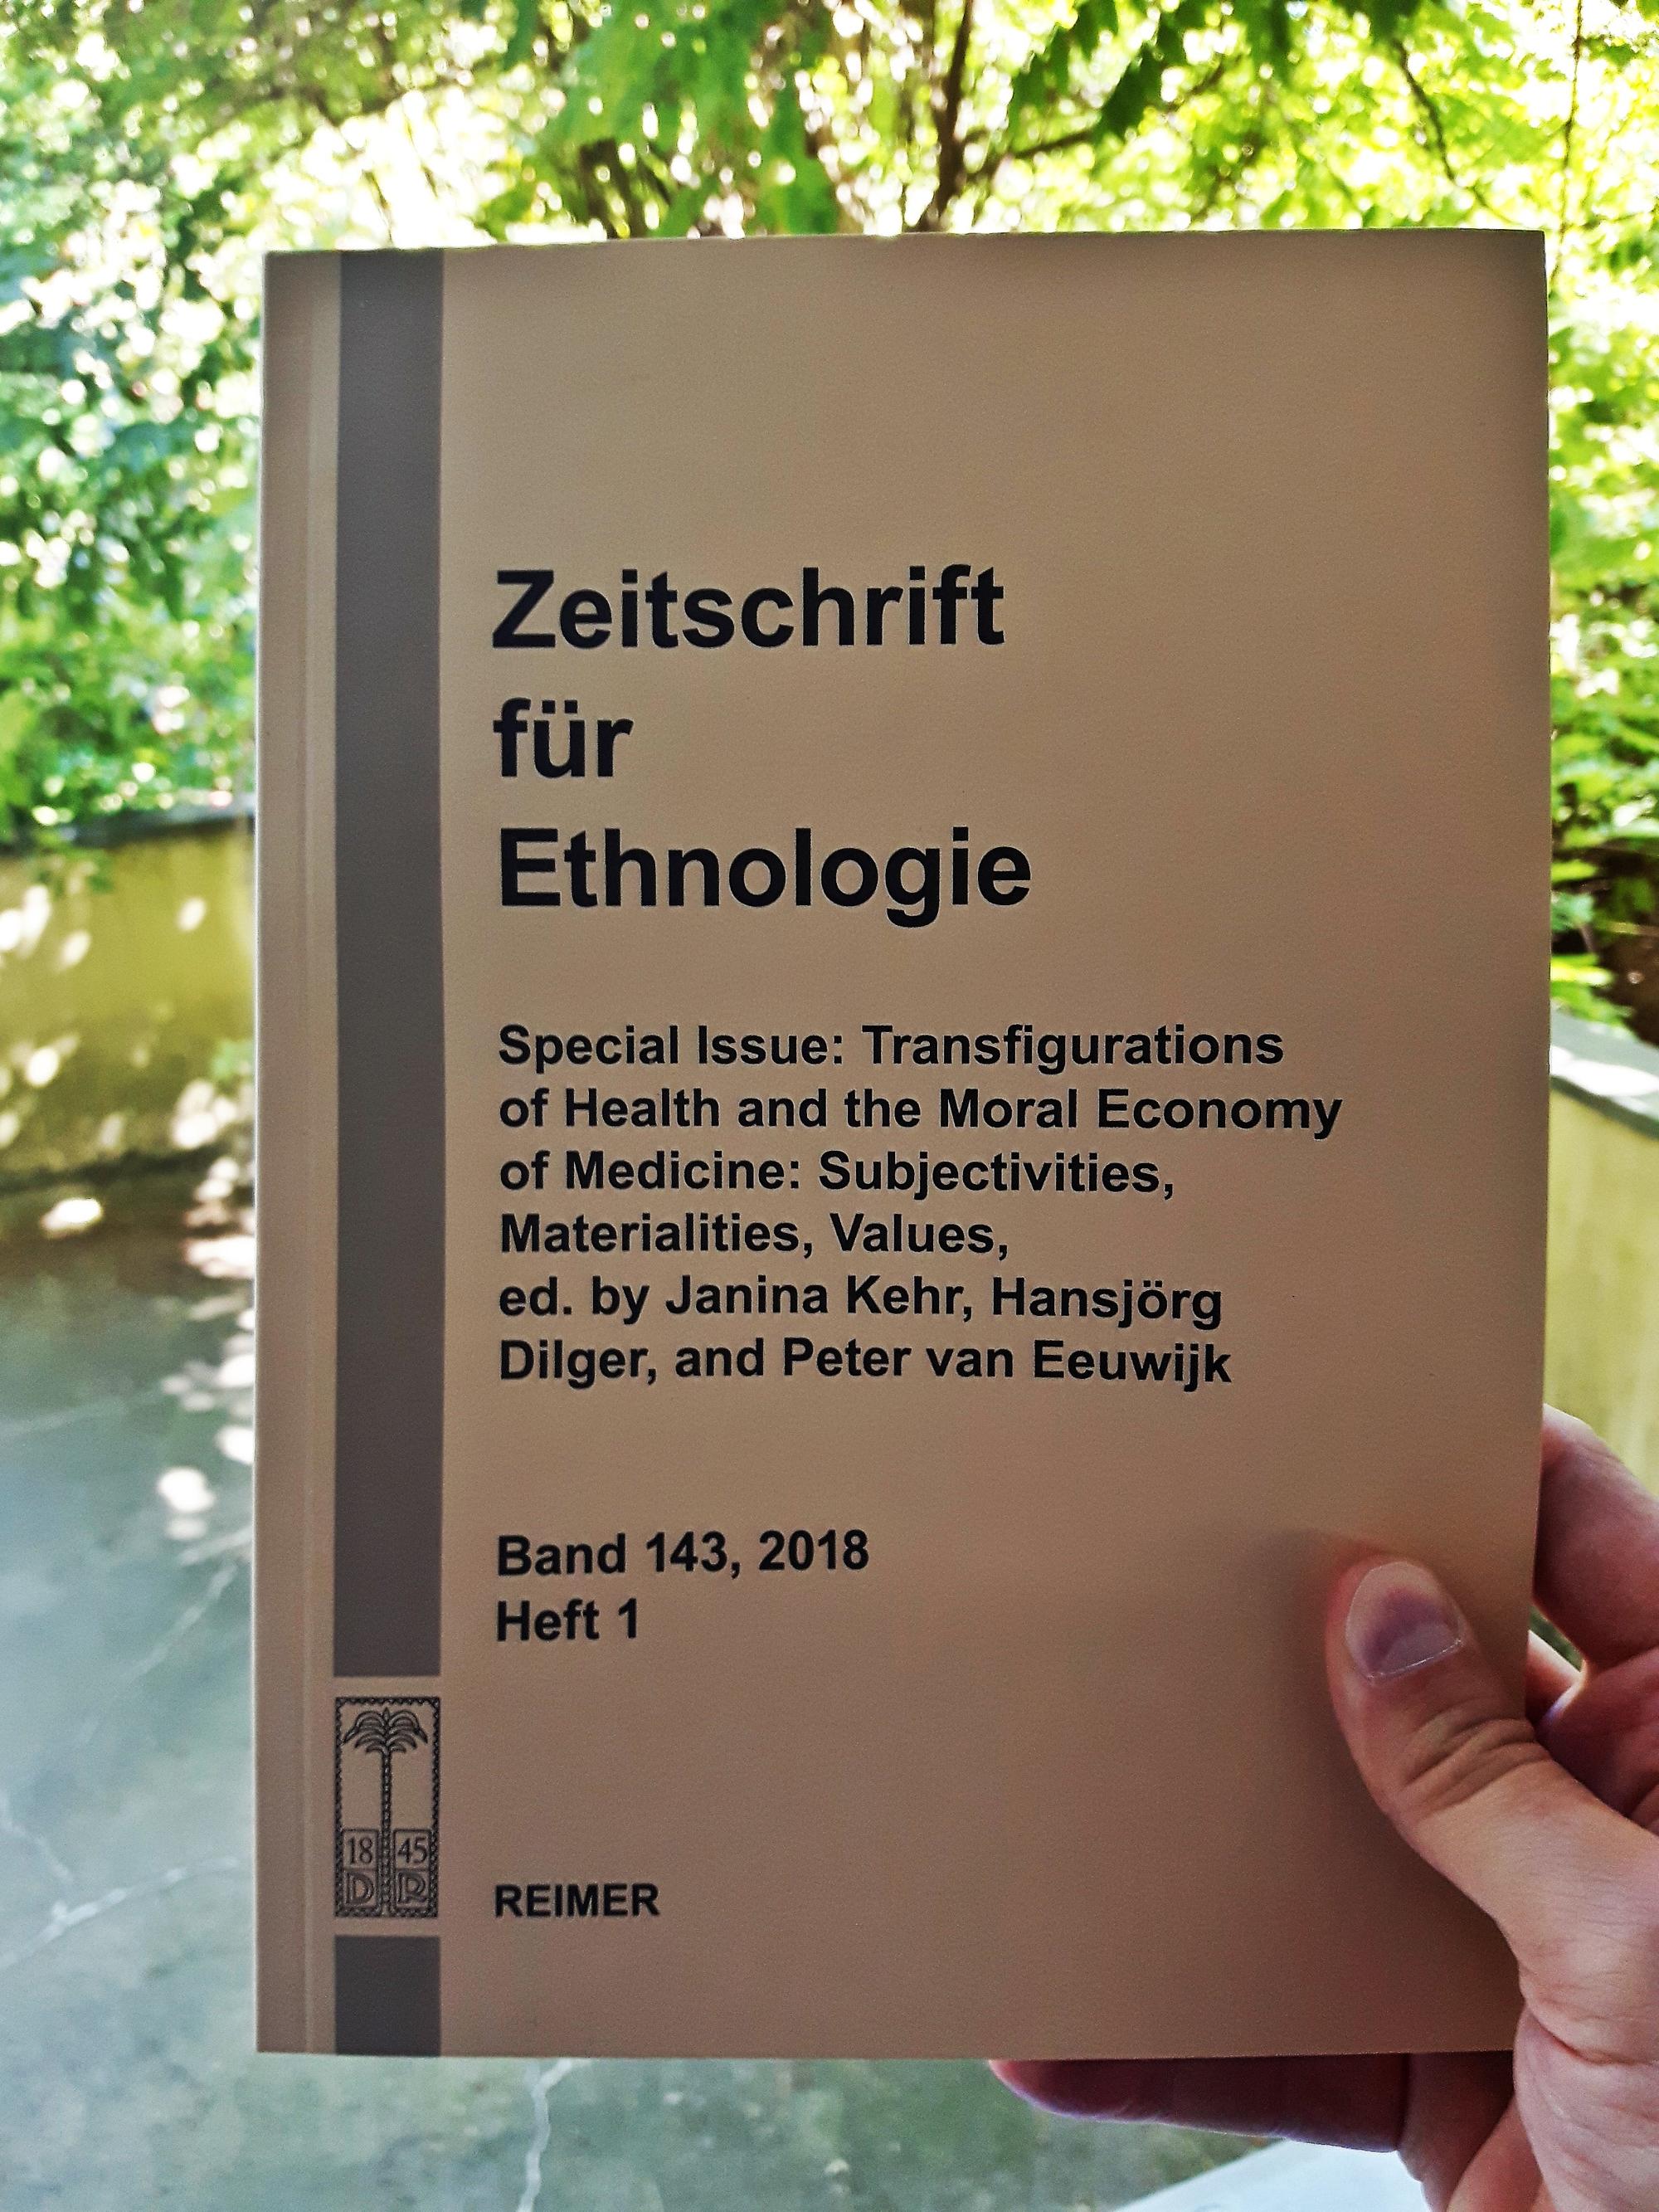 Zeitschrift für Ethnologie Special Issue “Transfigurations of Health and the Moral Economy of Medicine: Subjectivities, Materialities, Values”